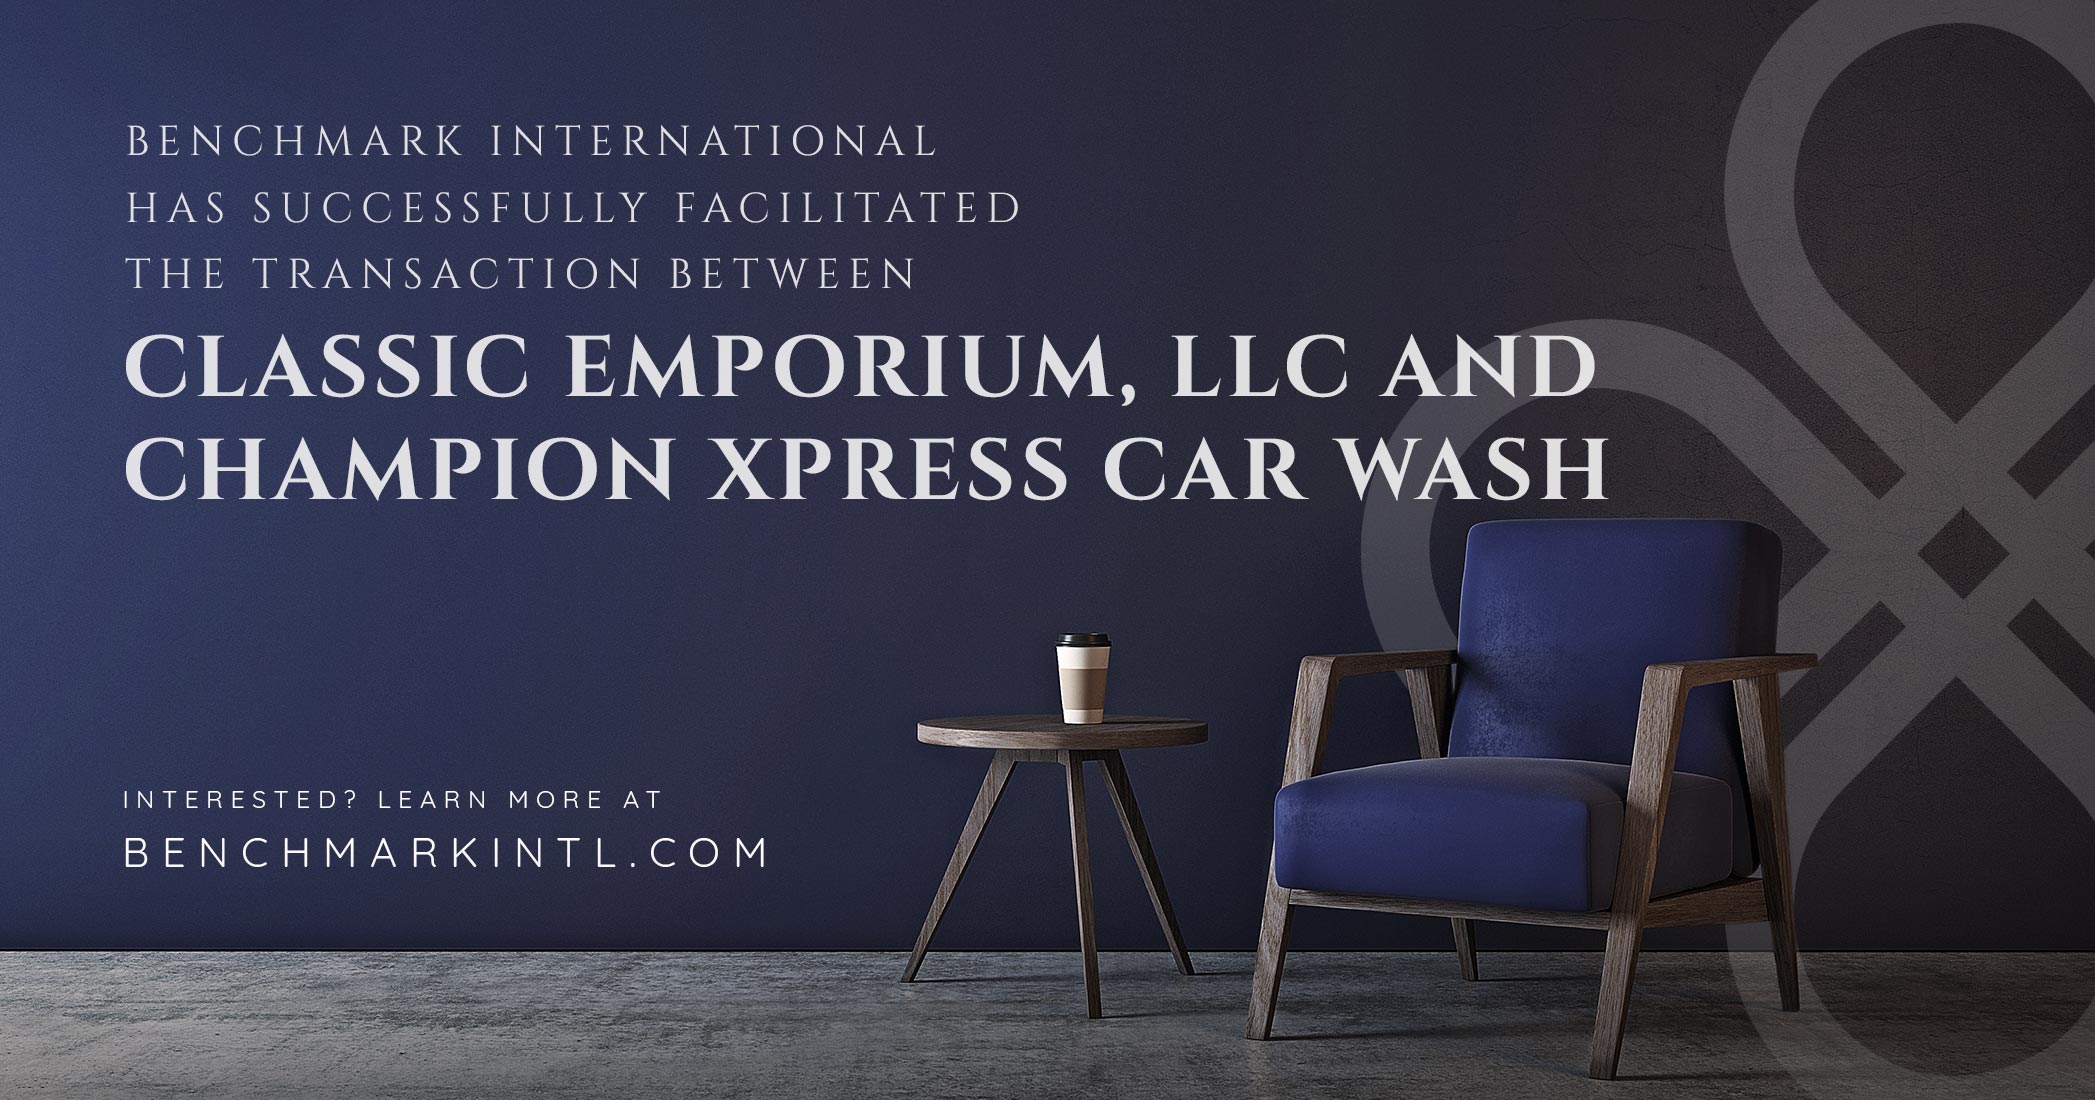 Benchmark International Successfully Facilitated the Transaction Between Classic Emporium, LLC And Champion Xpress Car Wash